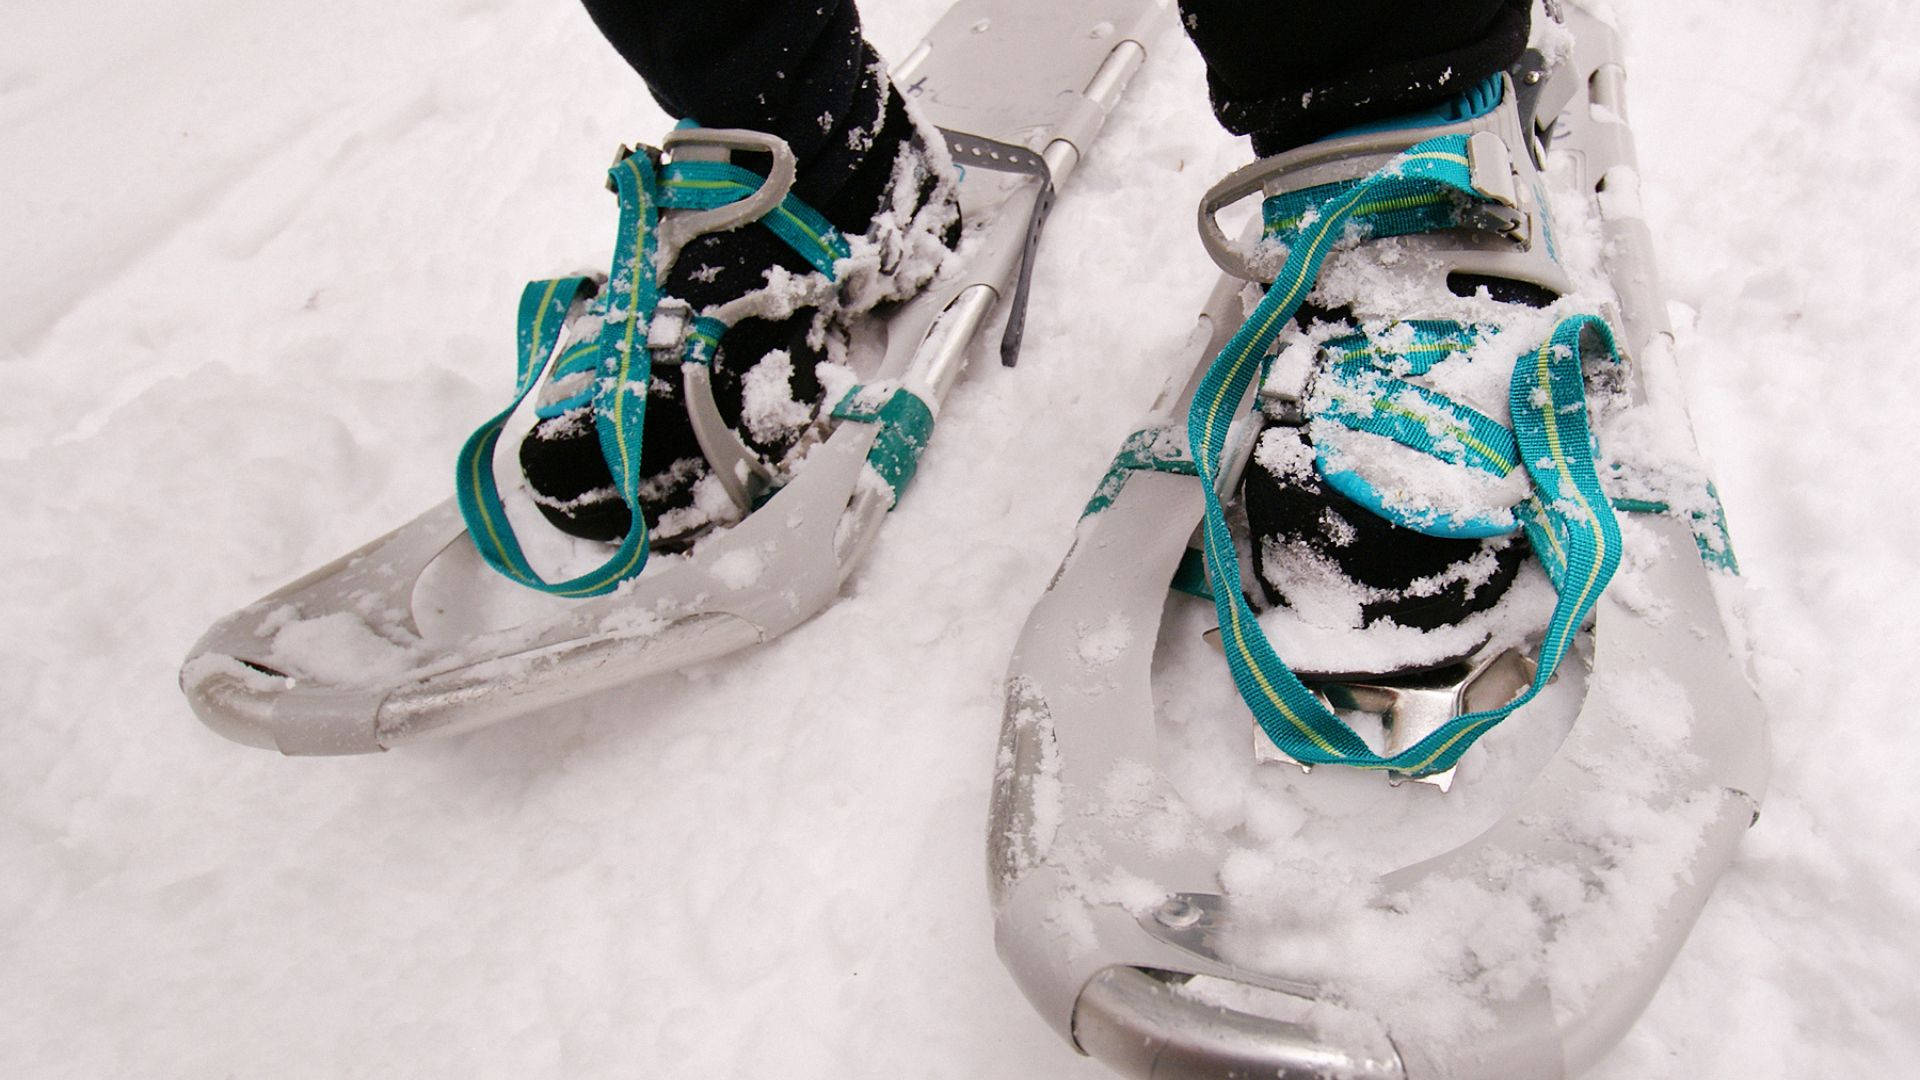 Snowshoeing Snow Shoes Gear Wallpaper